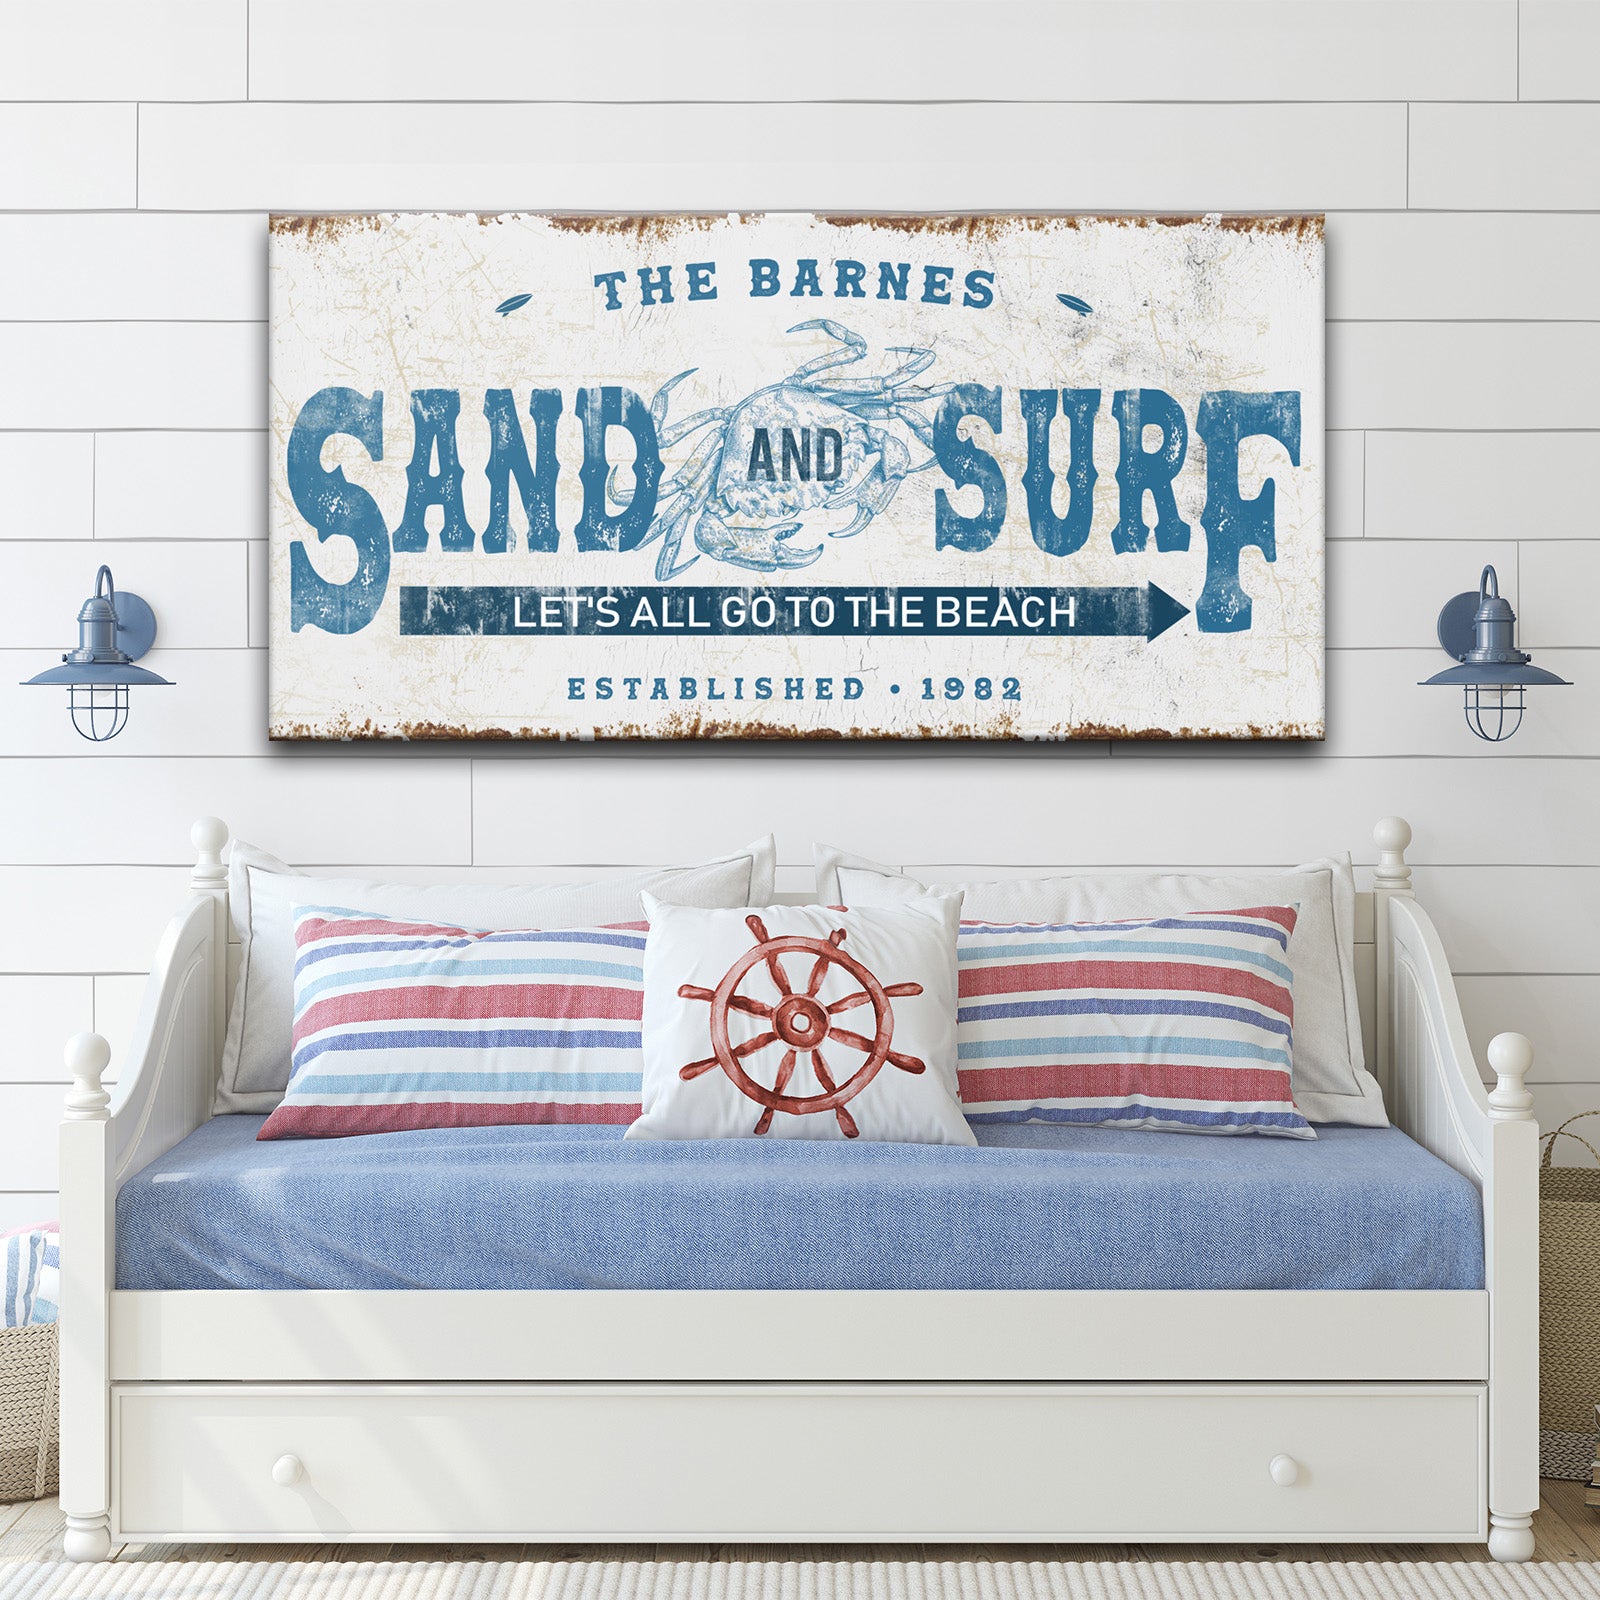 Sand and Surf Sign - Image by Tailored Canvases